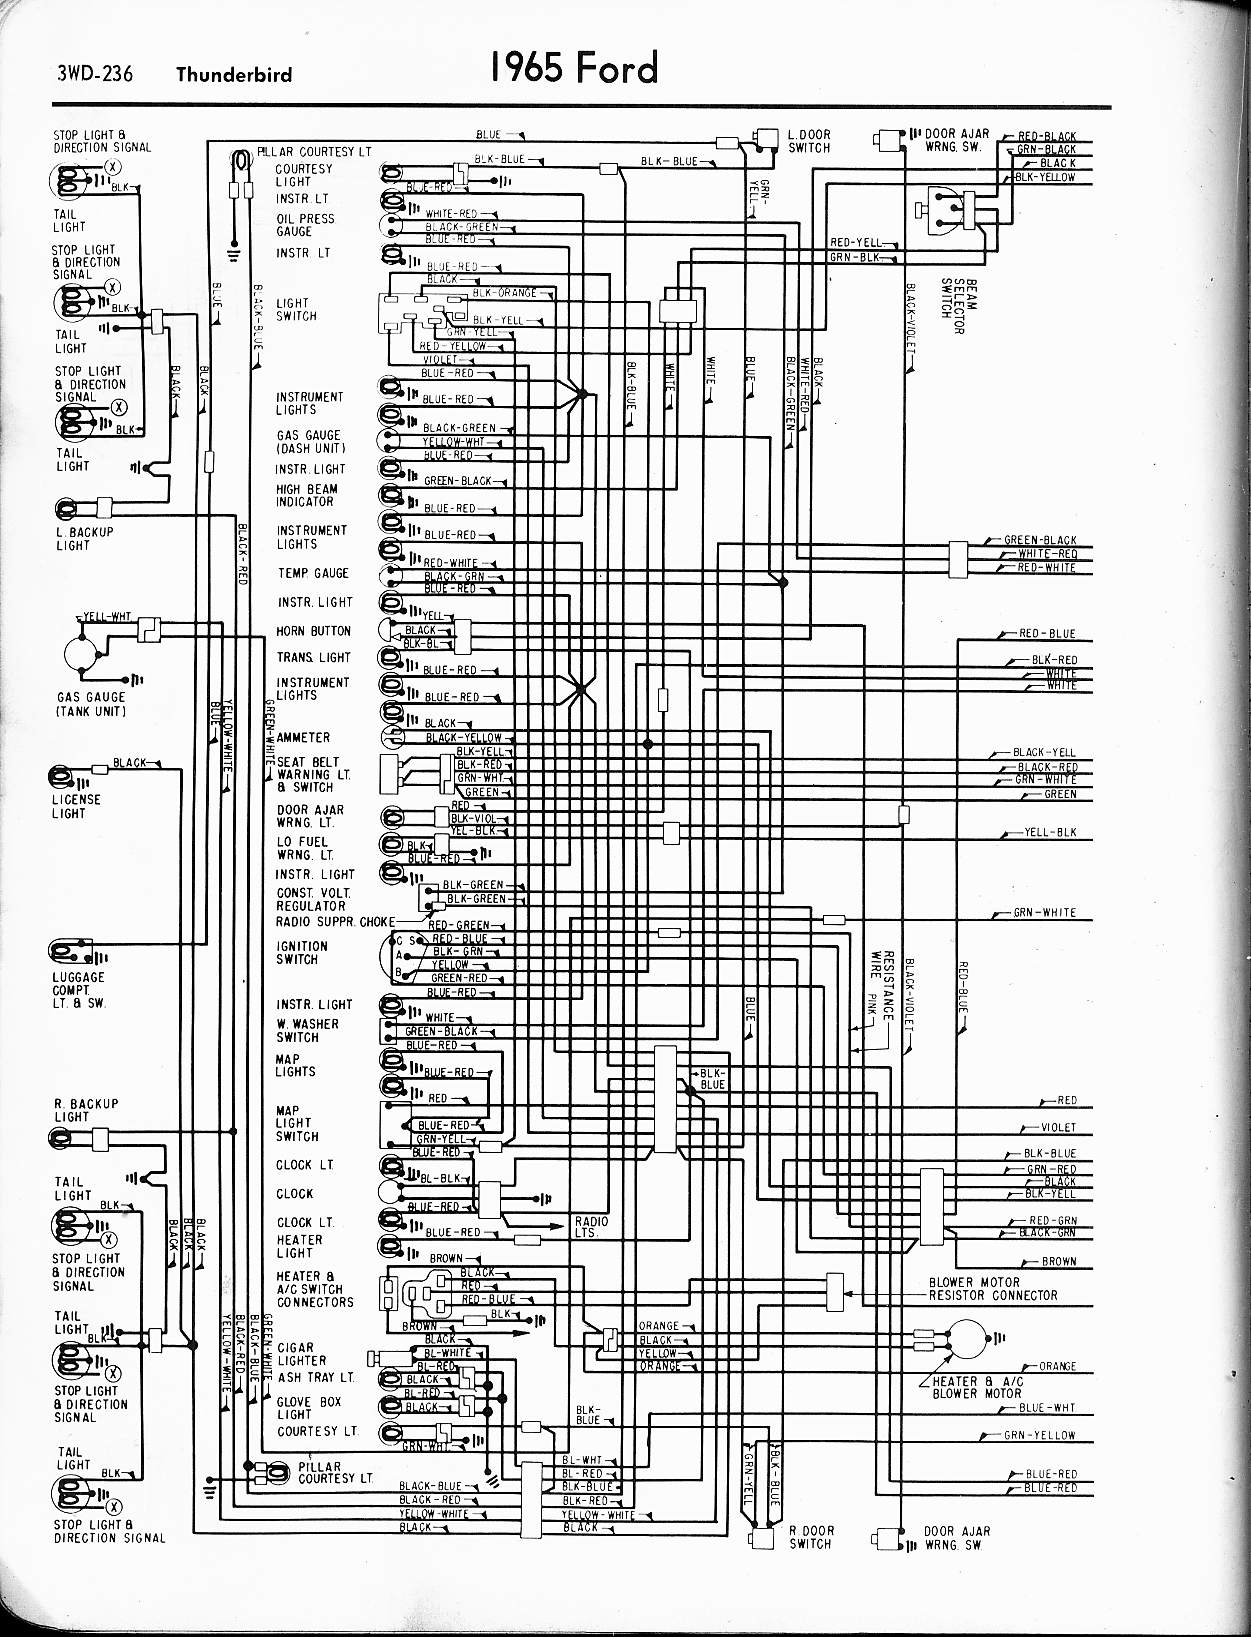 1965 Ford F100 Ignition Switch Wiring Diagram from www.oldcarmanualproject.com